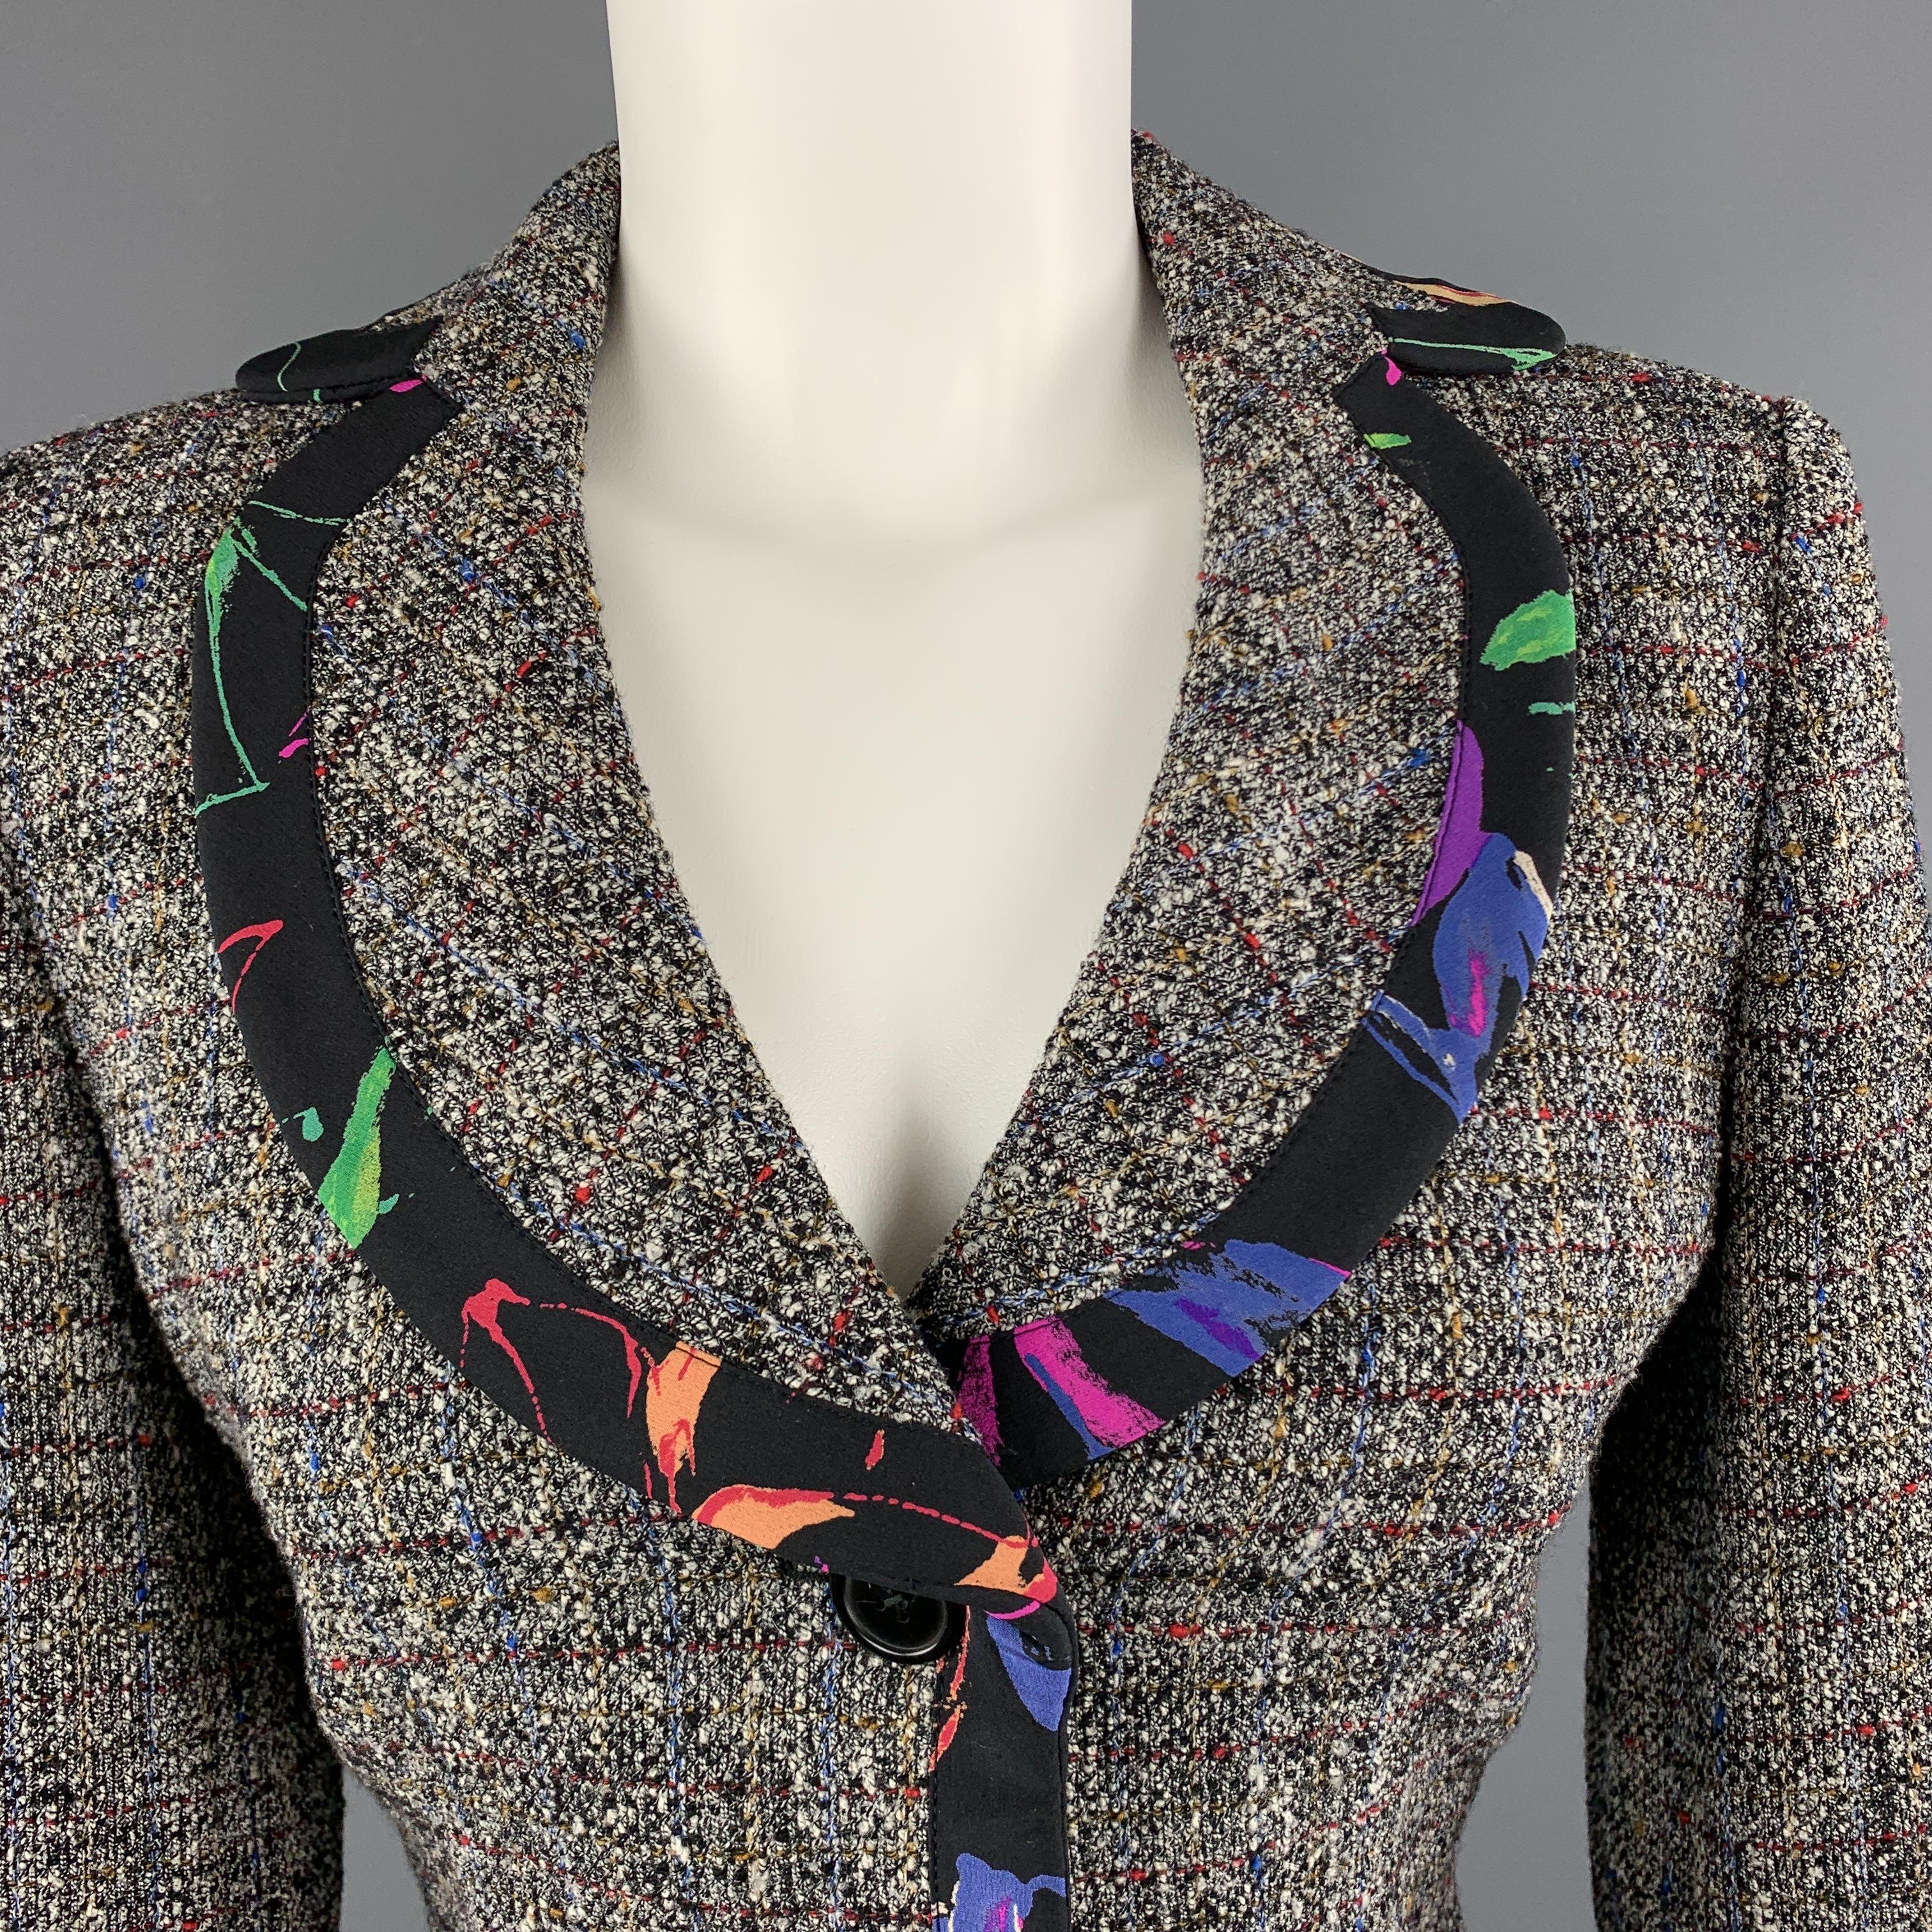 ARMANI COLLEZIONI blazer comes in black and white tweed with multi-color pattern throughout and features a single breasted three button front, round lapel, and floral print trim. Made in Italy.

Excellent Pre-Owned Condition.
Marked: